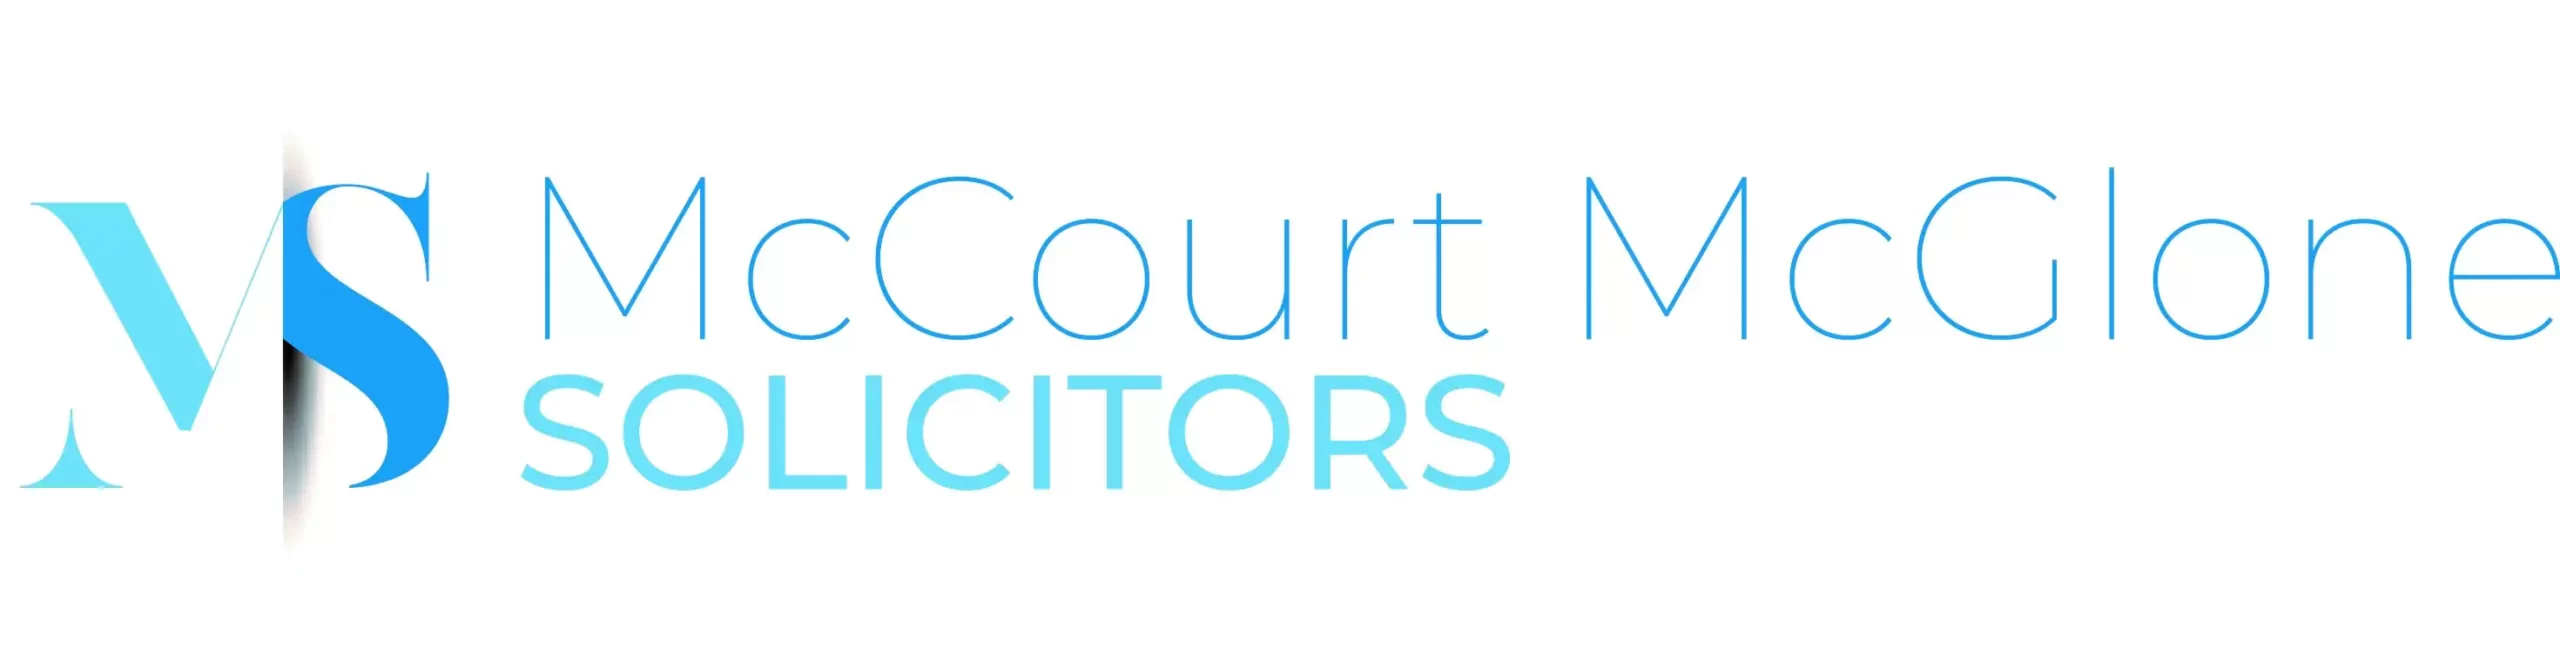 McCourt McGlone Solicitors - Lurgan - Co. Armagh - logo | Criminal Law, Family Law, Personal Injury Law, Divorce, Employment Law, Wills & Probate, Accidents at Work, Judicial Review, Immigration Law